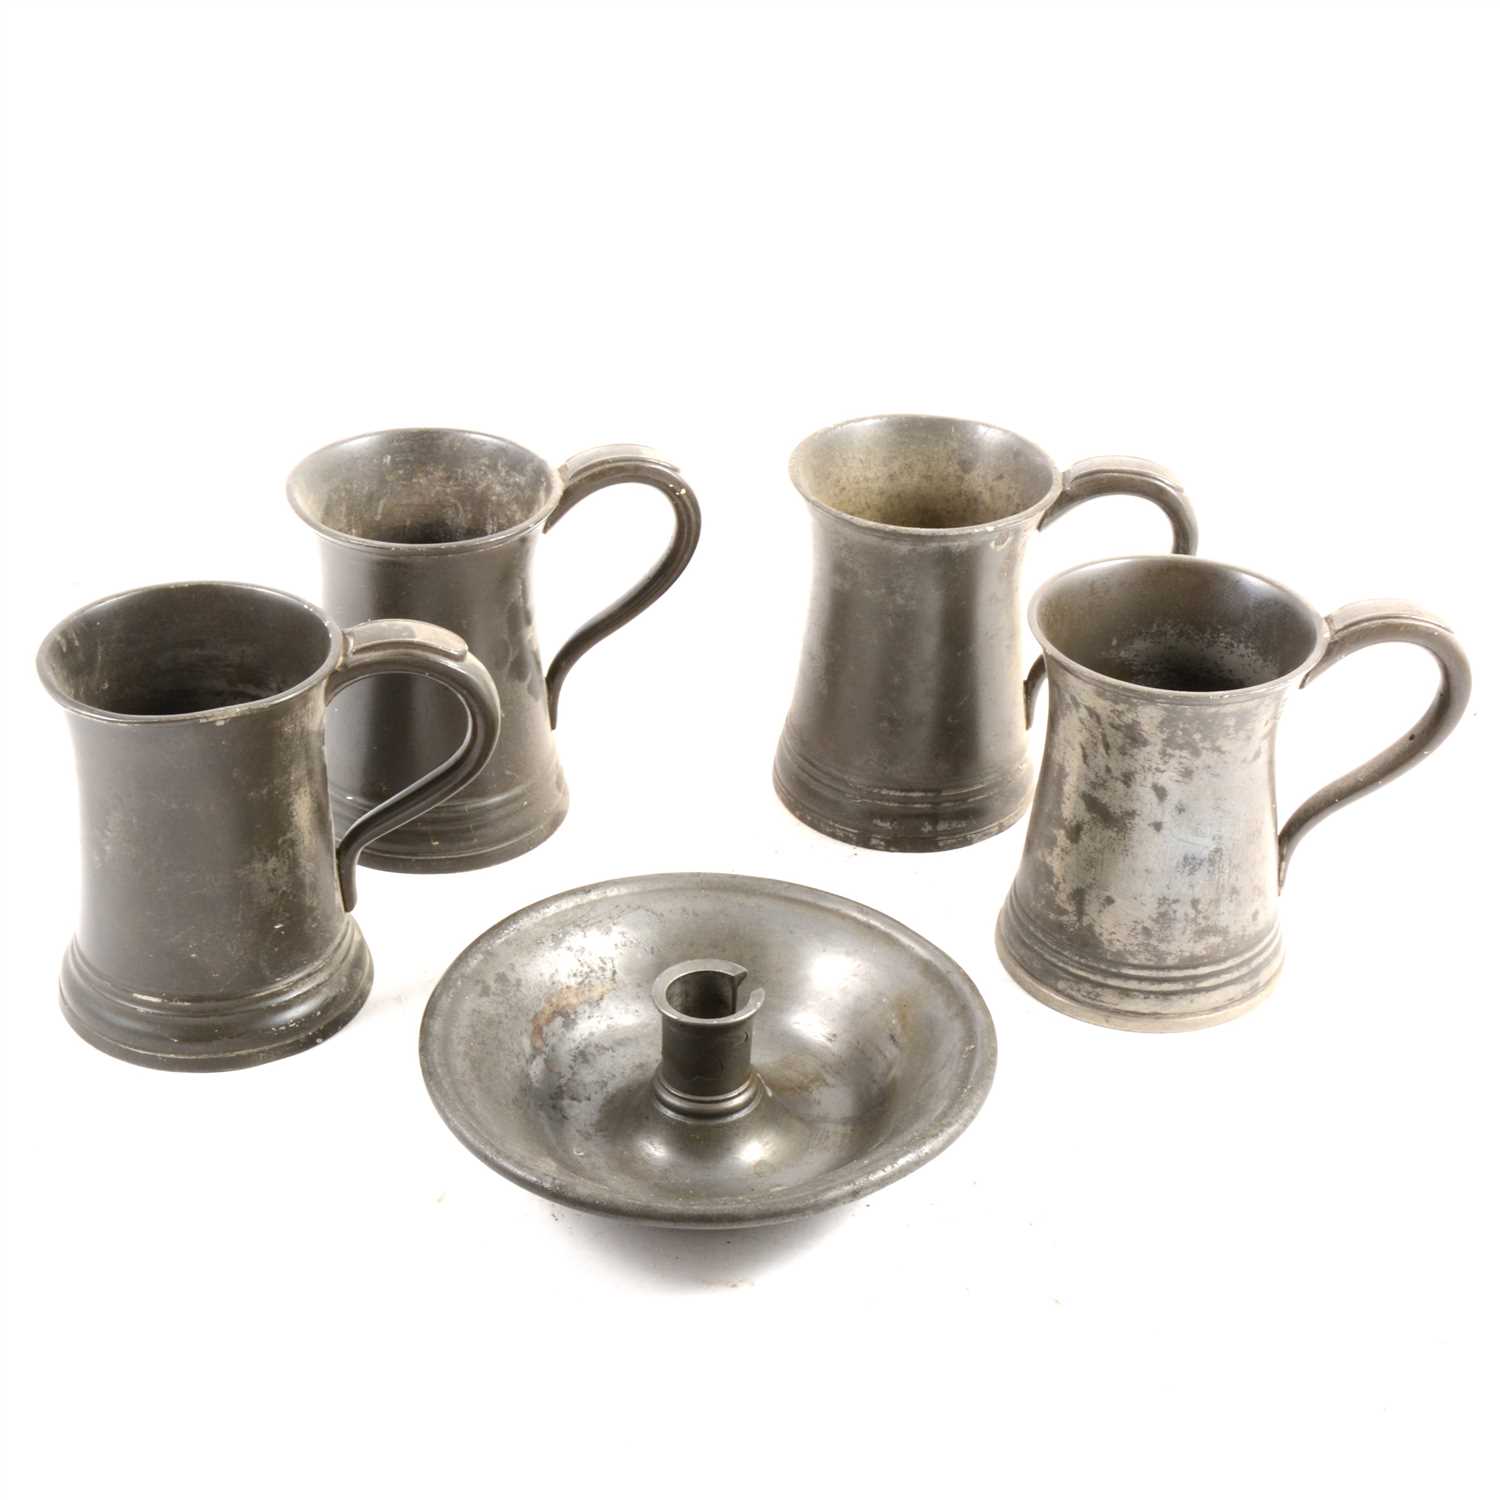 Lot 145 - Four 1 pint Victorian pewter tankards, stamped Morgan & Gaskell, a pewter inkwell and pen stand, and other metal wares.